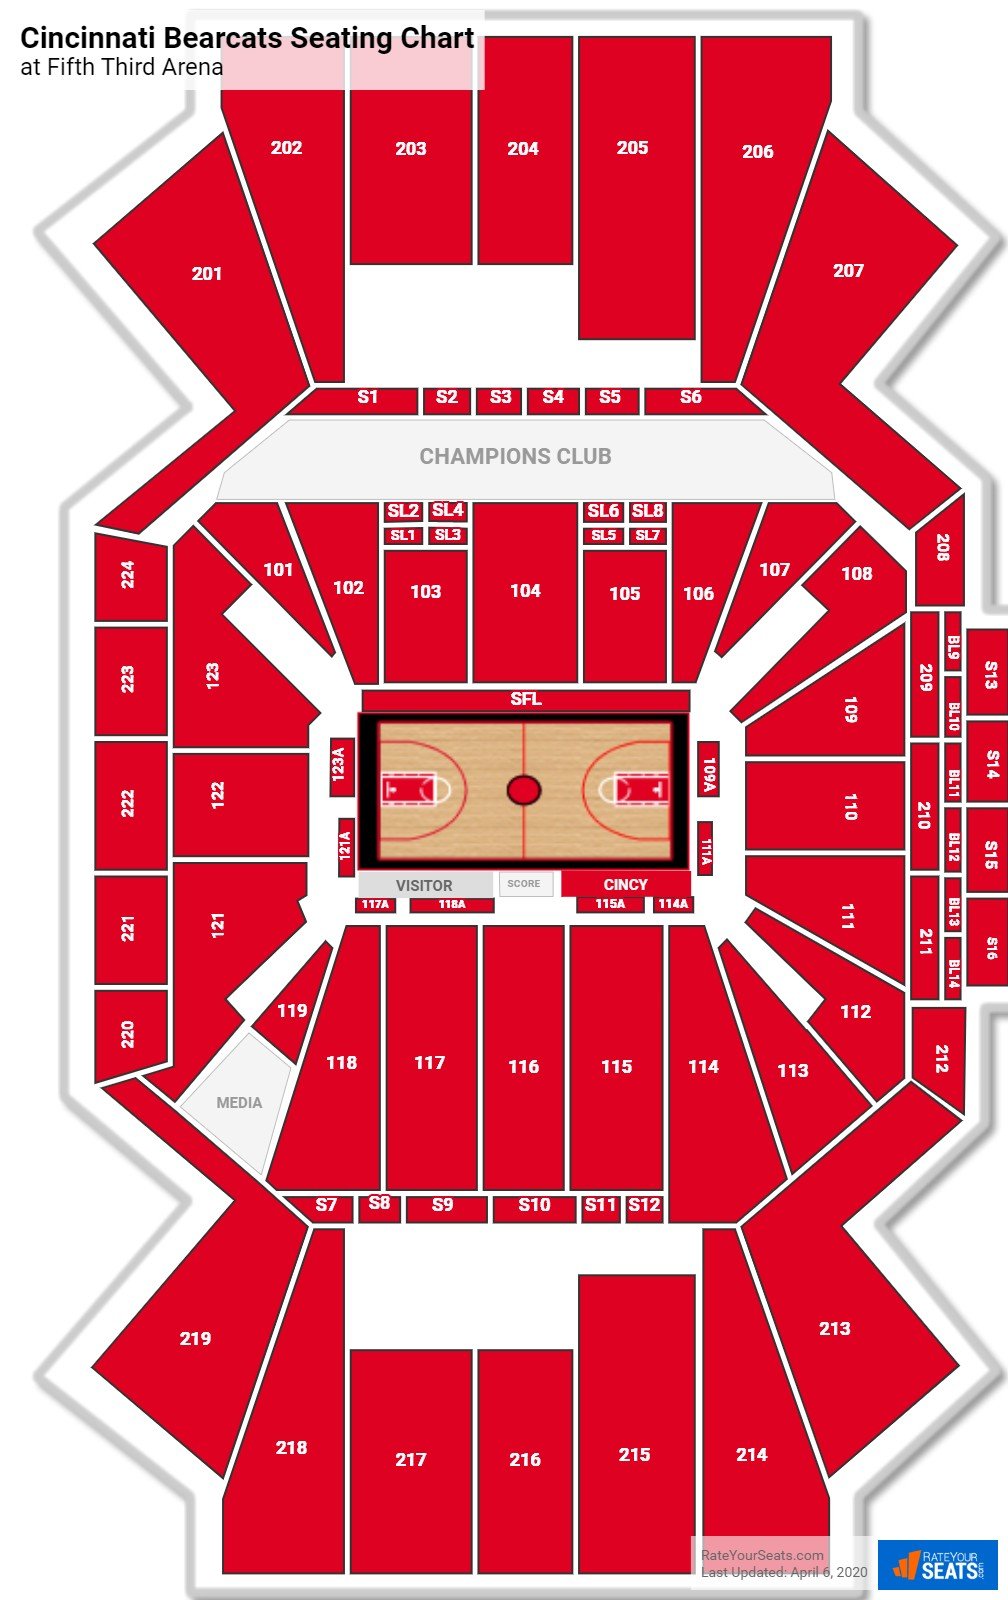 Section 206 at Fifth Third Arena